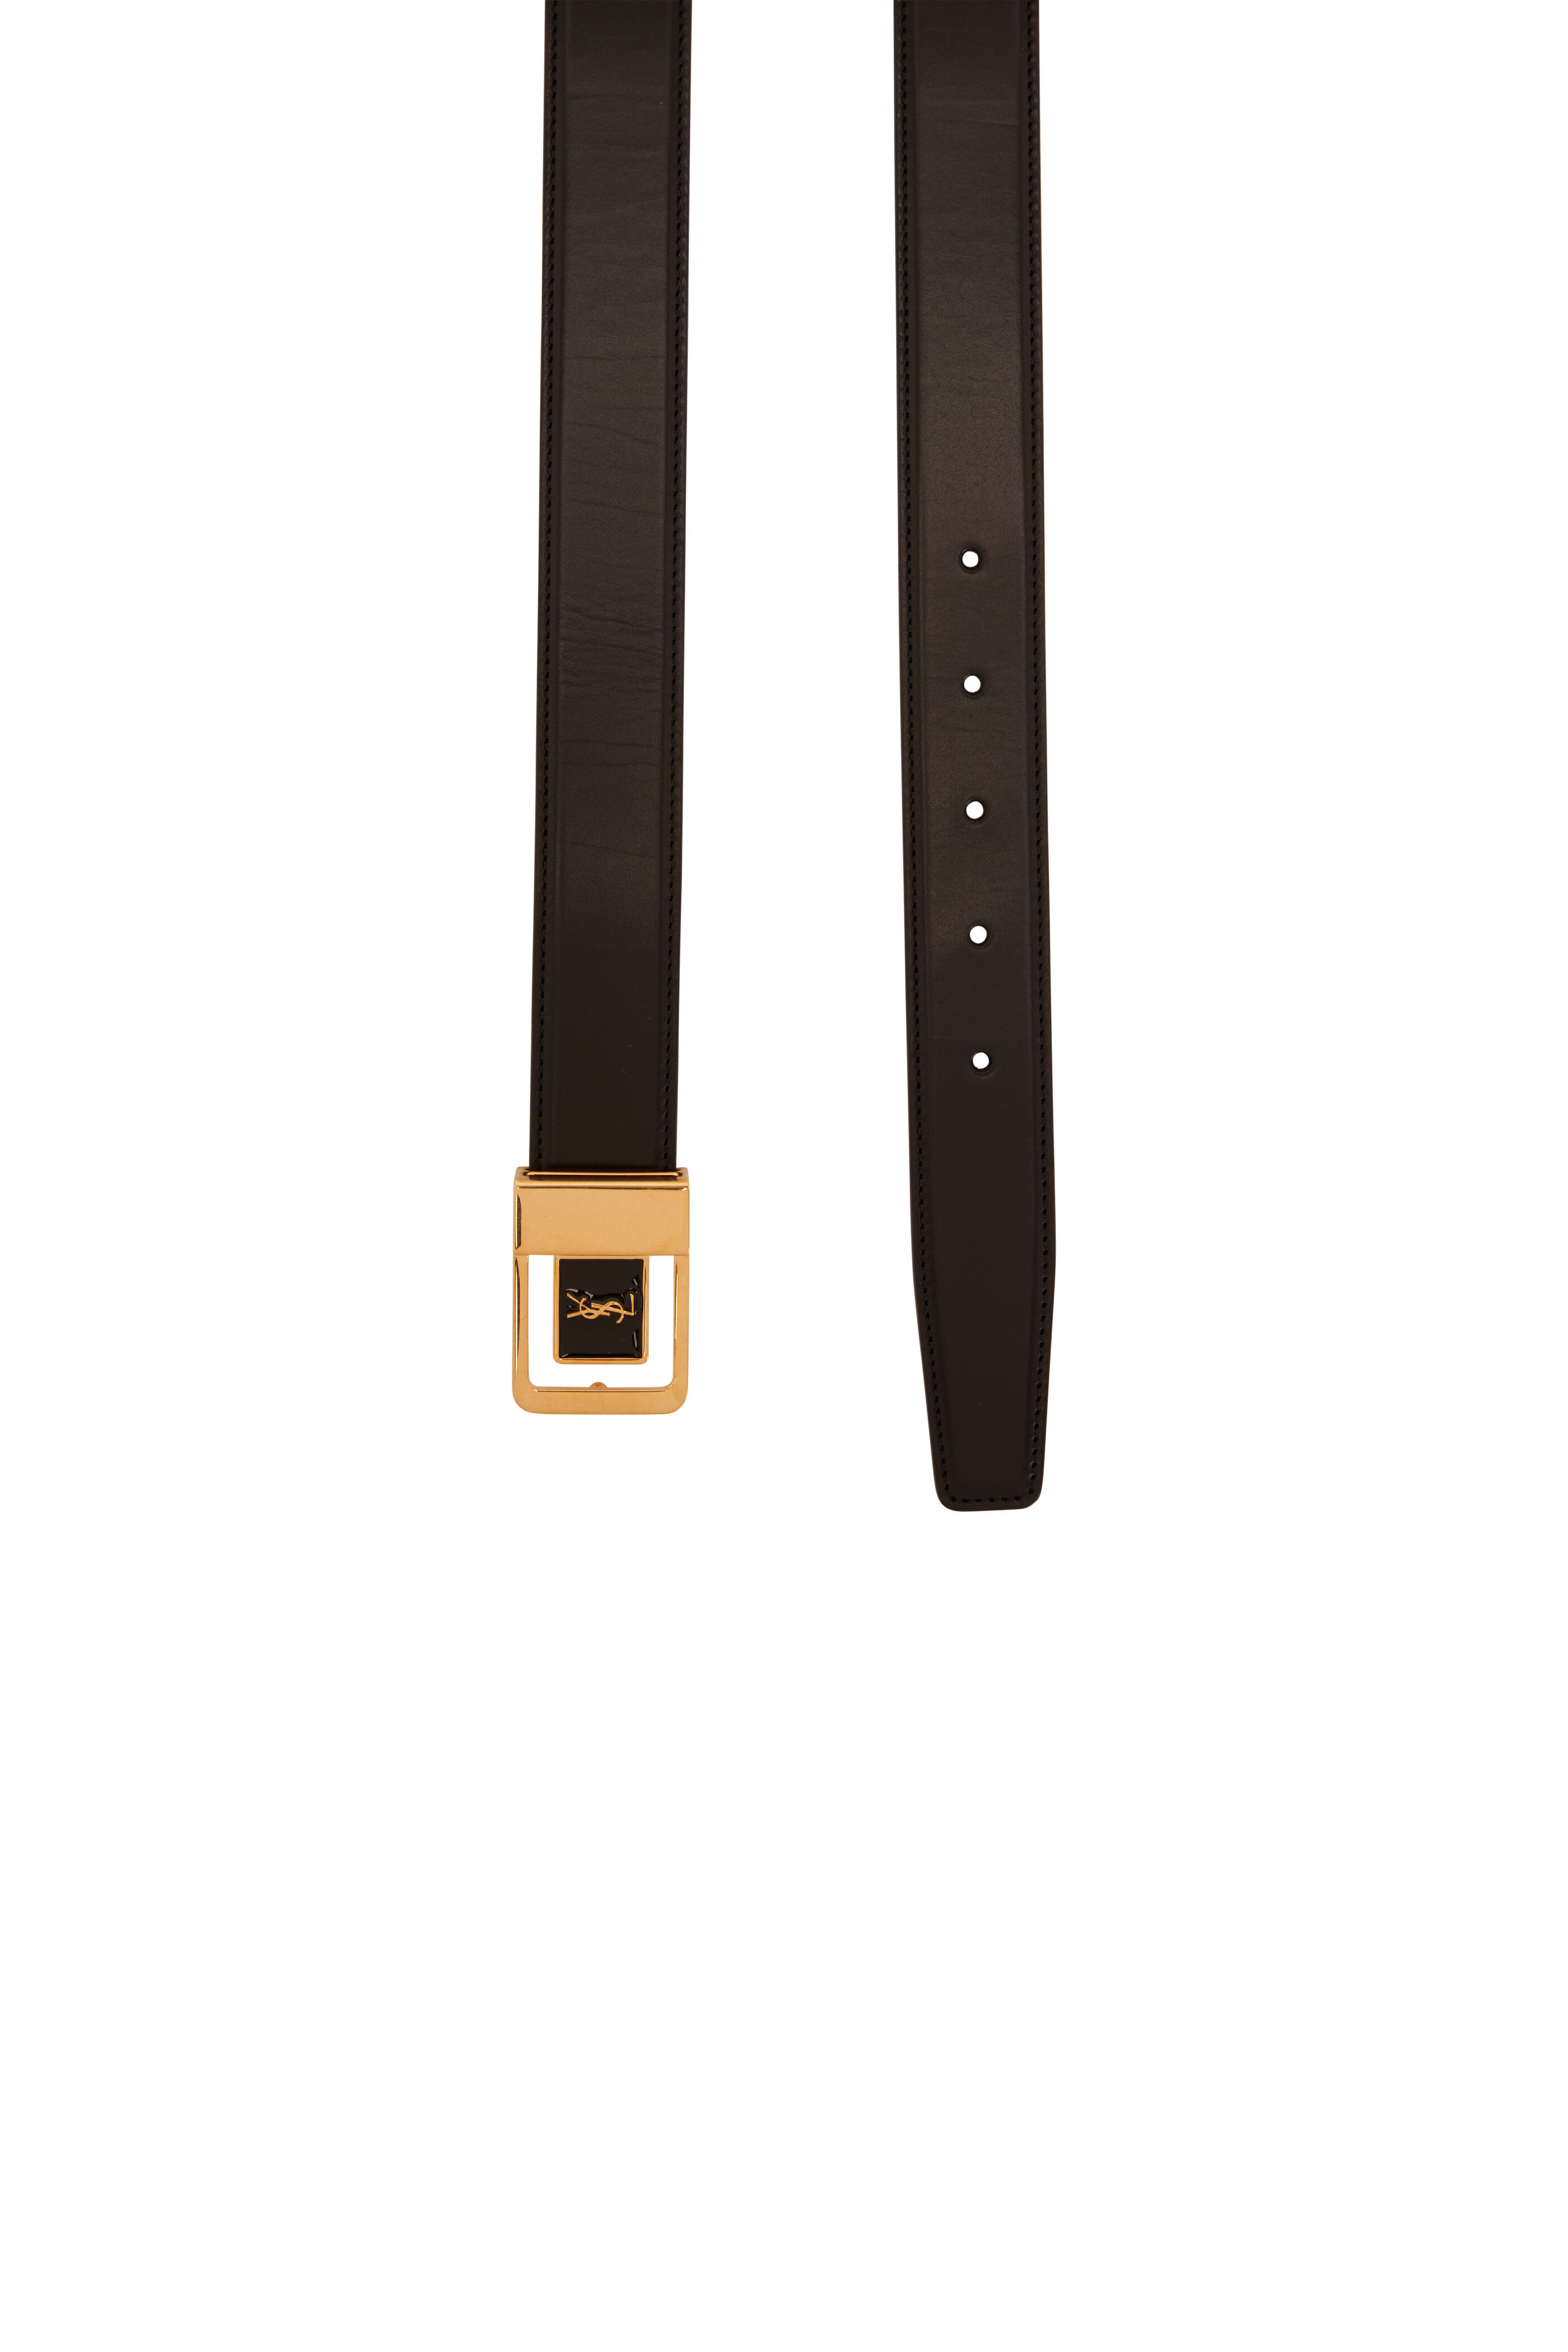 Brass-Toned Circle Buckle Leather Belt